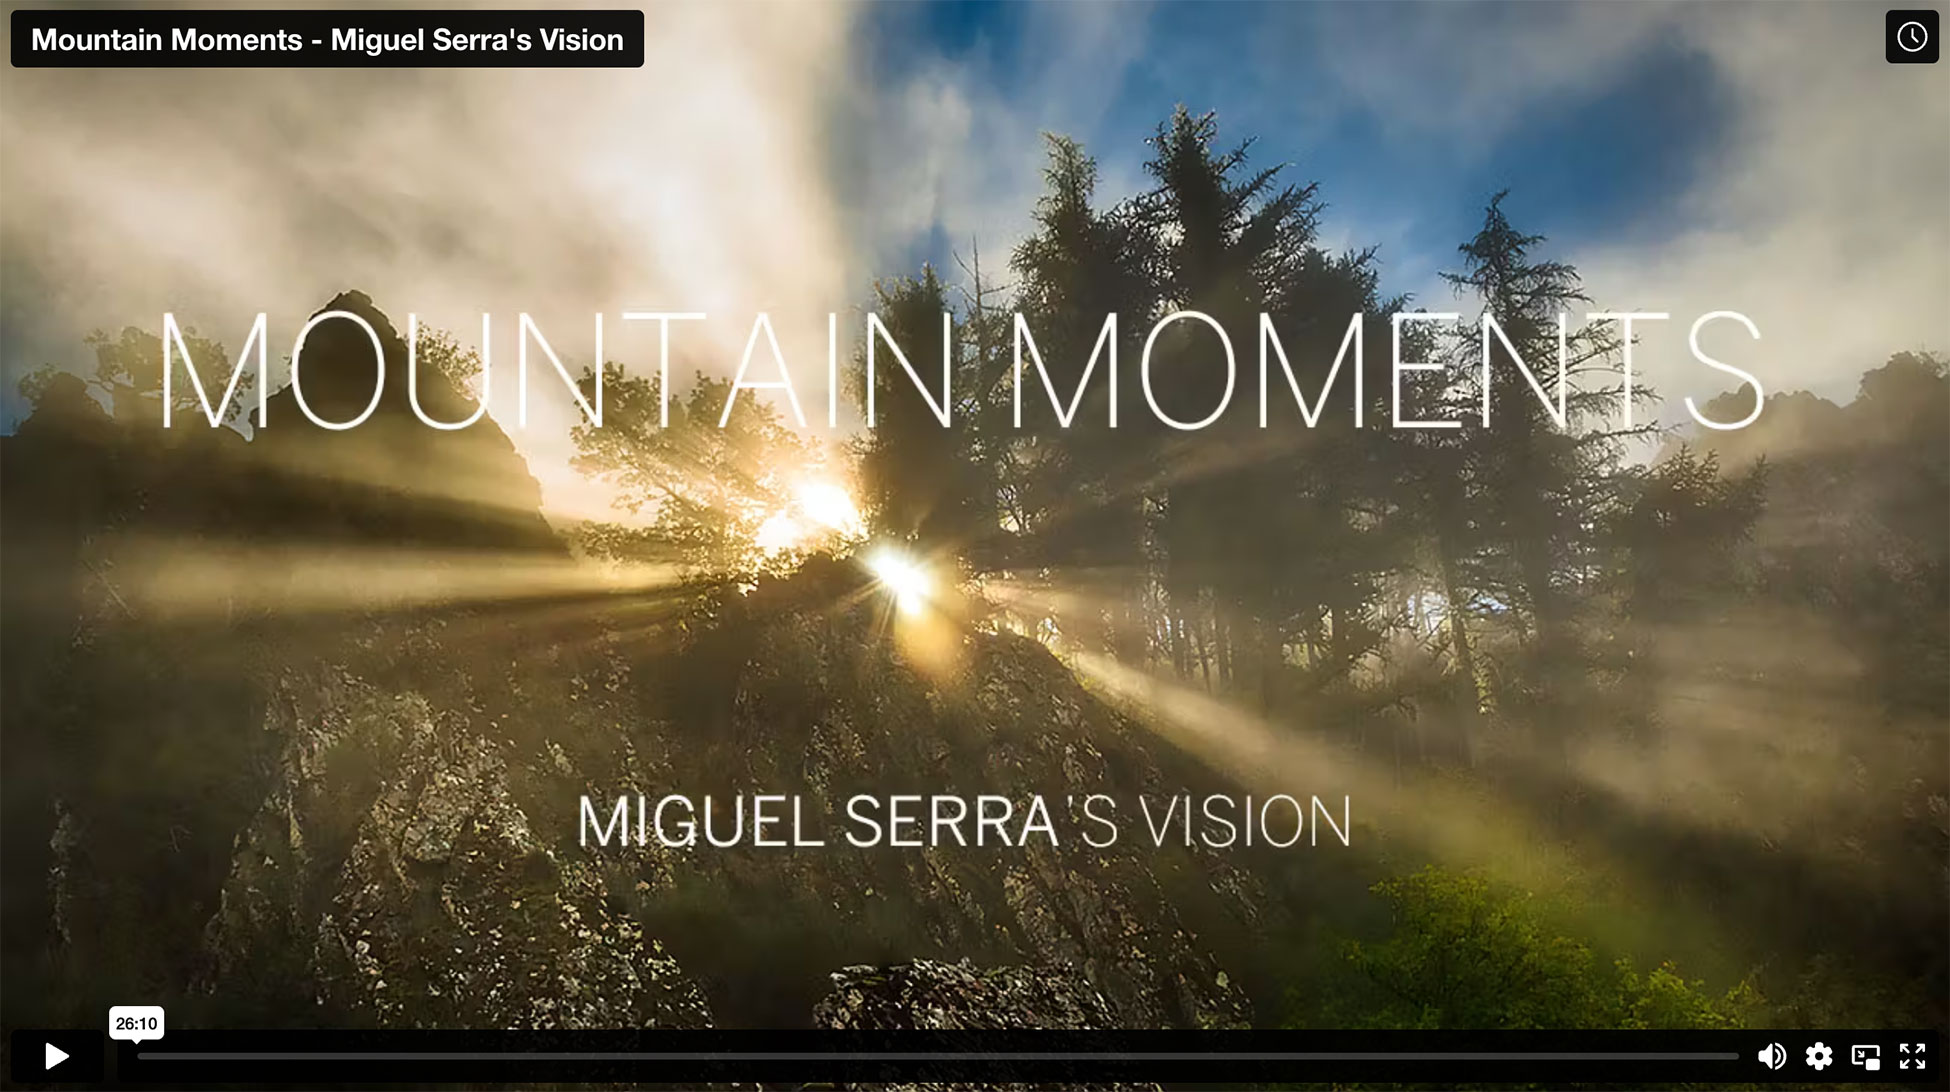 Premium/ MOVIE: “Mountain Moments: Miguel Serra’s Vision” – Join this landscape photographer for unforgettable moments